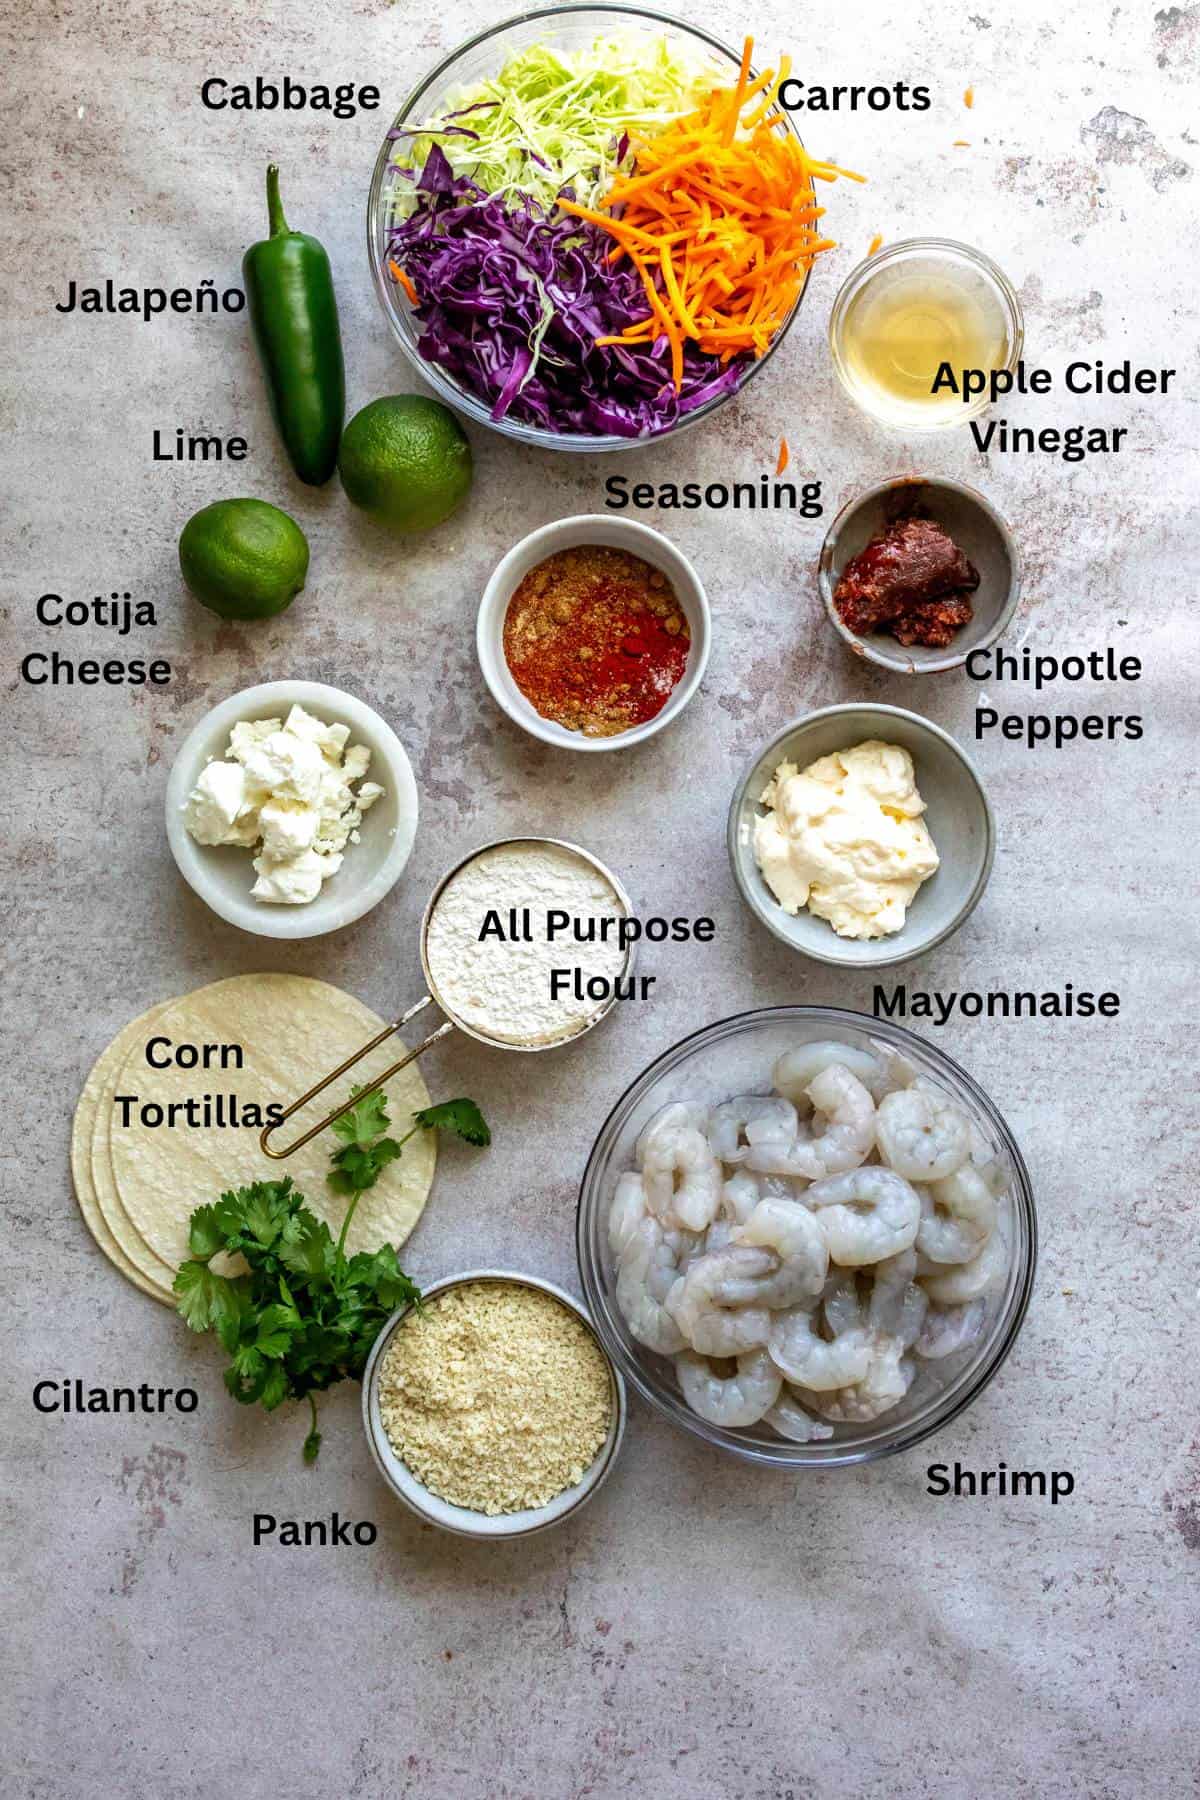 Overhead photo of bowls and small plates showing the ingredients for the recipe. 